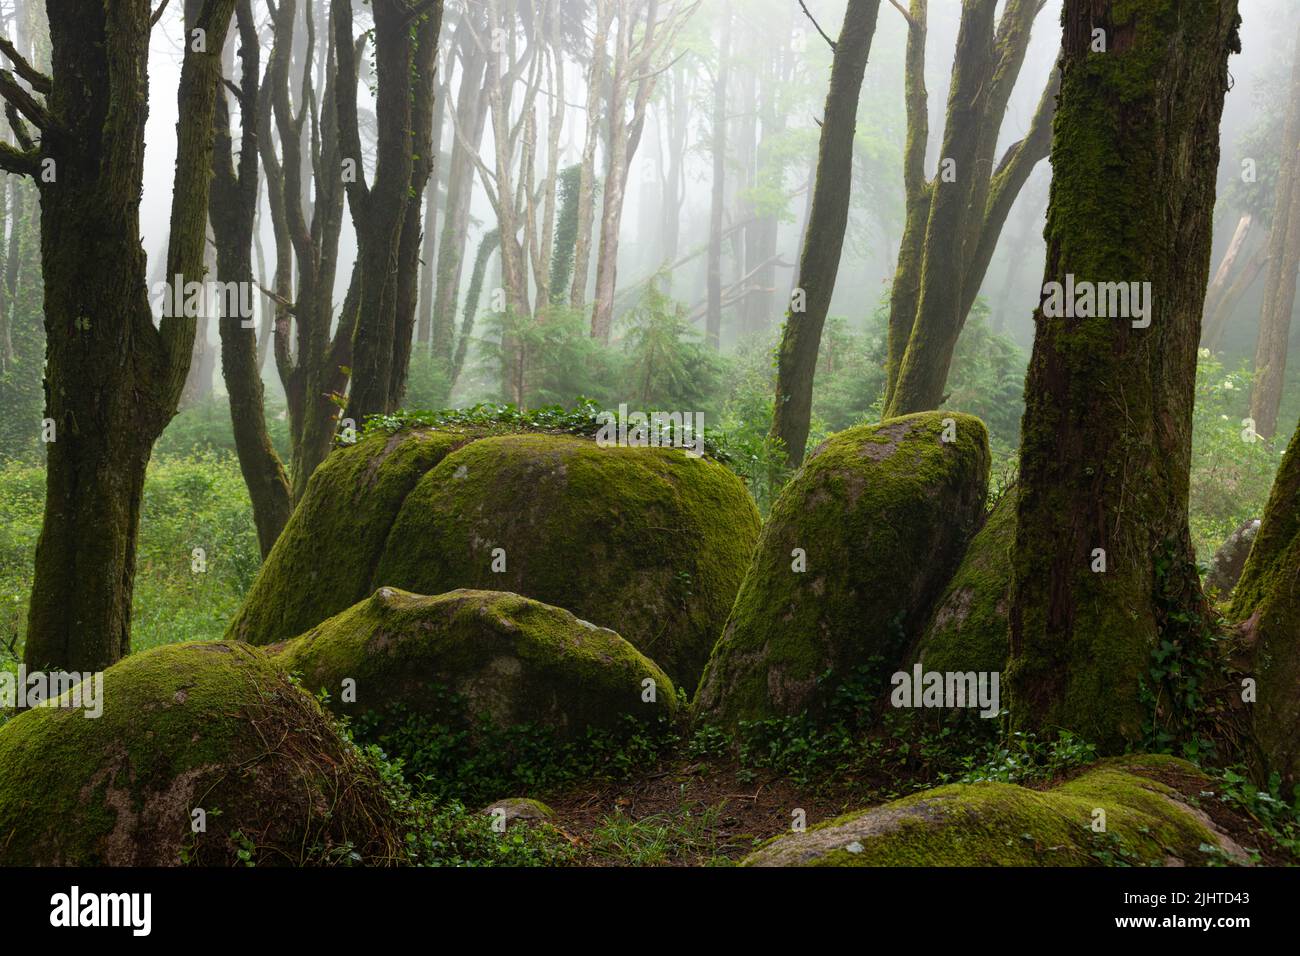 Big granite rocks covered with moss and trees in the fog in the fairy tale forest Serra de Sintra, Portugal Stock Photo